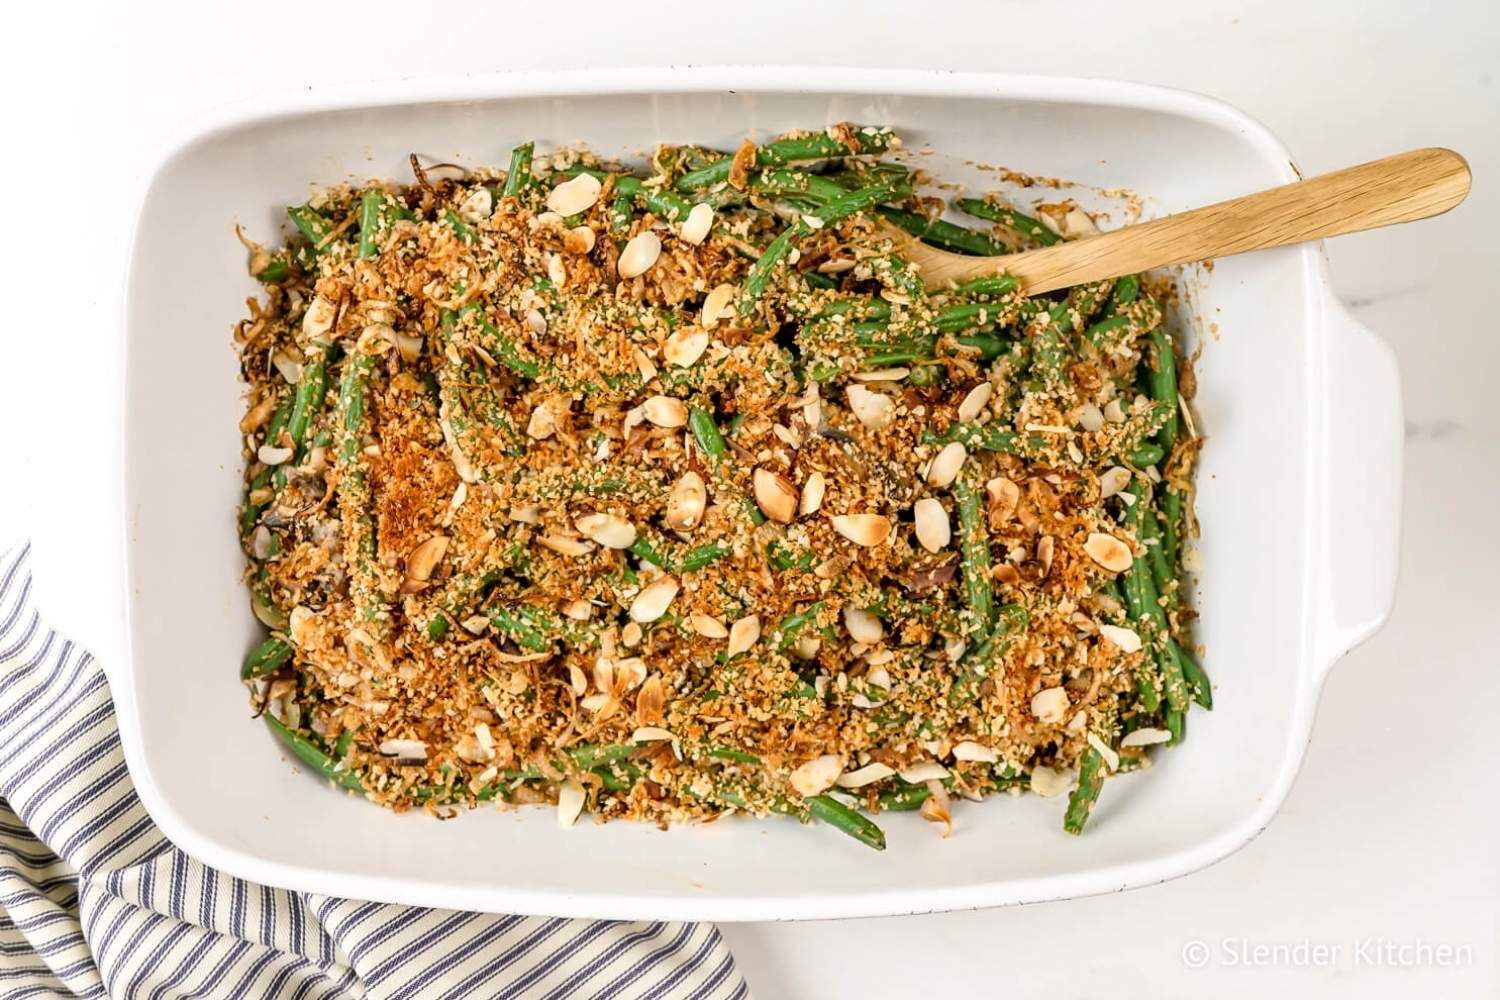 Healthy Green Bean Casserole with green beans, mushroom sauce, and a crispy almond onion topping in a baking dish with a striped napkin.